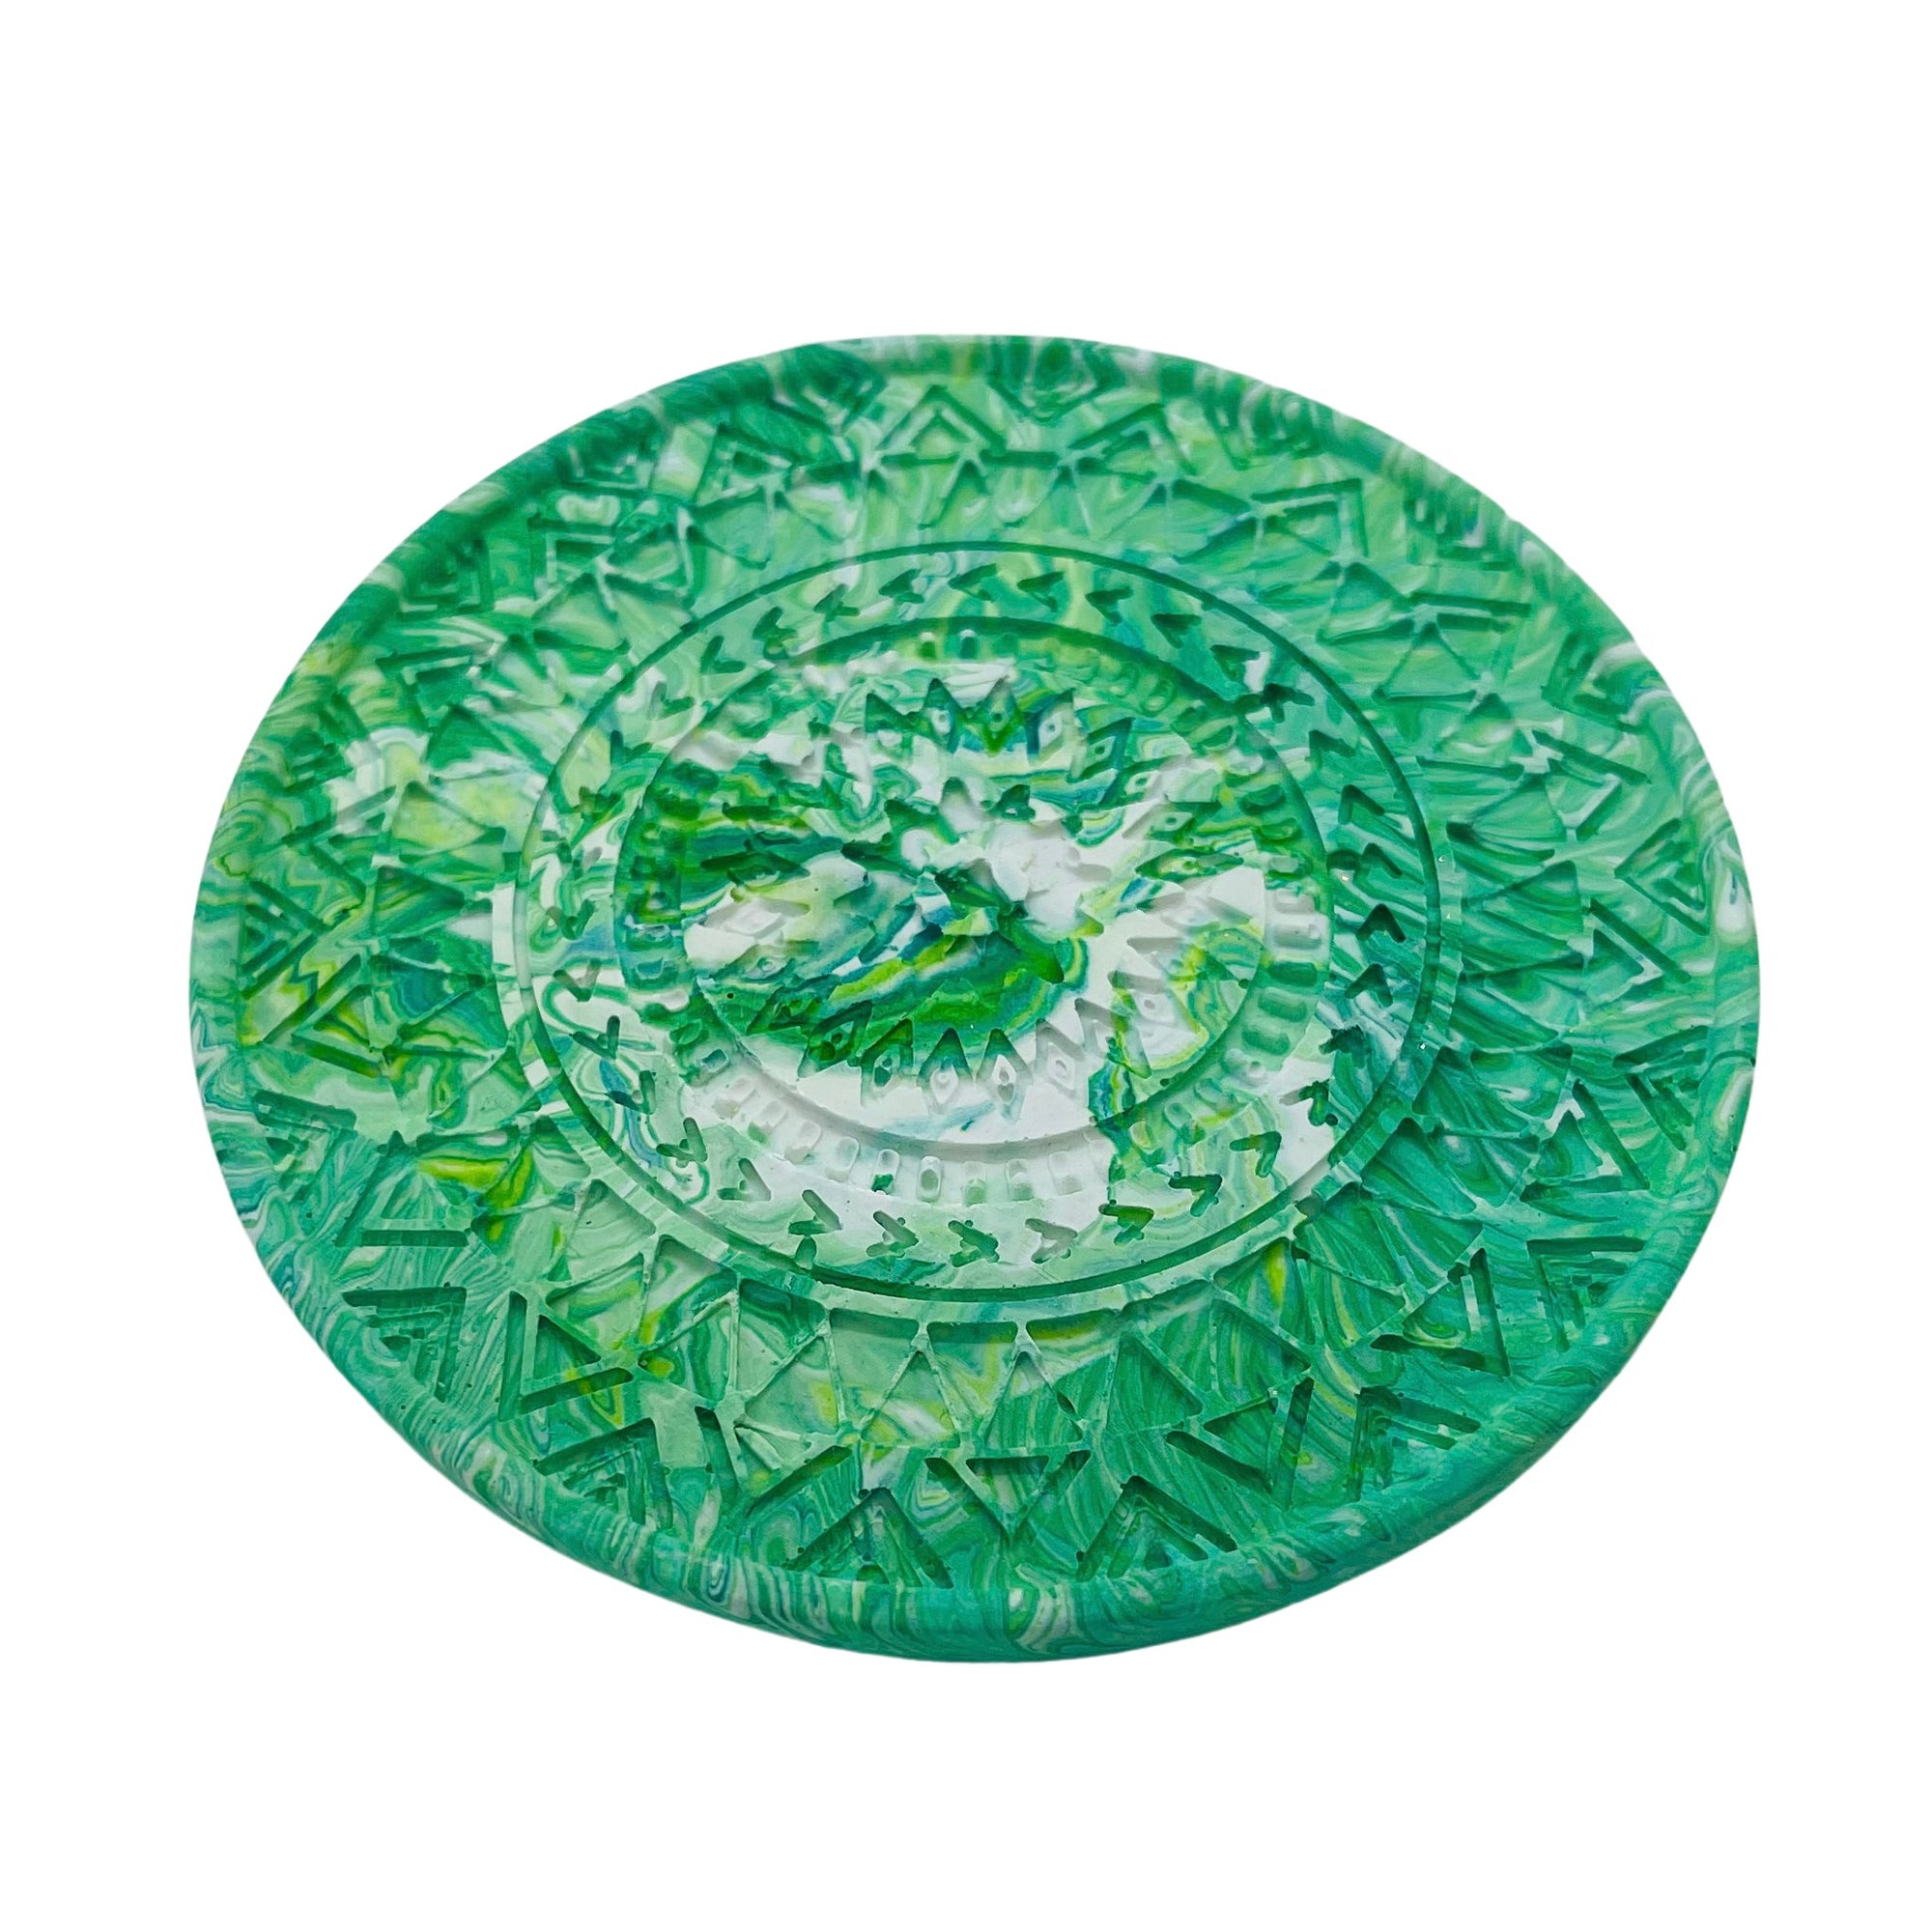 A circular mandela Jesmonite coaster measuring 9.3cm in diameter and 0.8 cm in height marbled with fern green pigment.